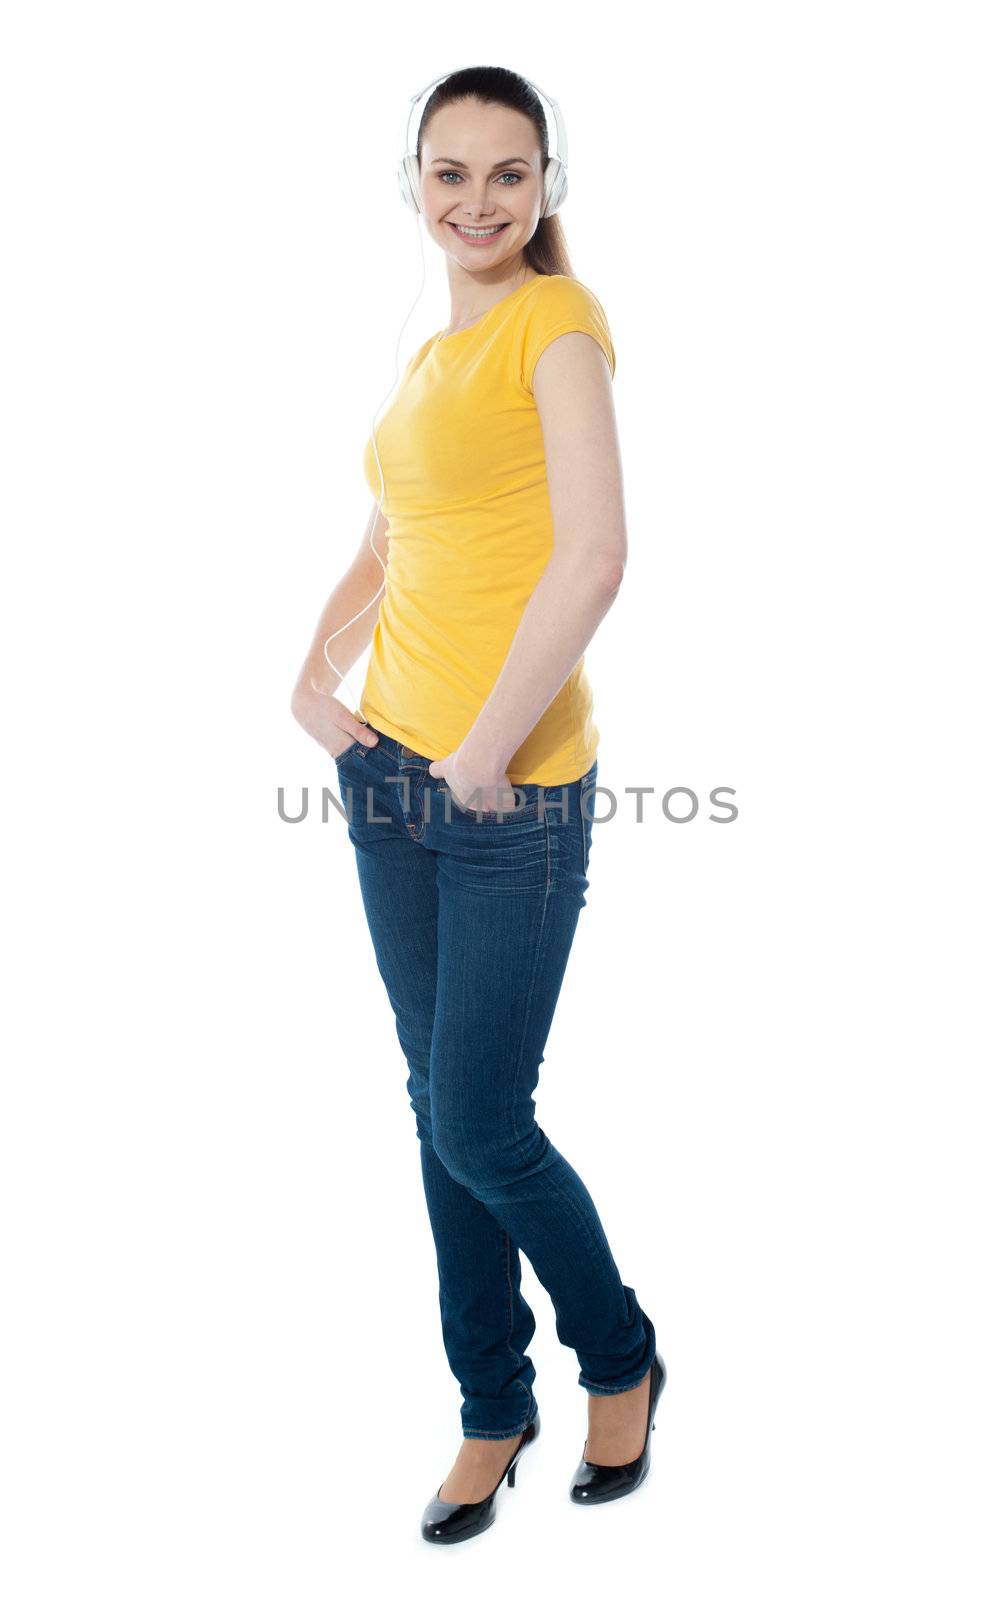 Stylish teenager enjoying music and posing with hands in pocket